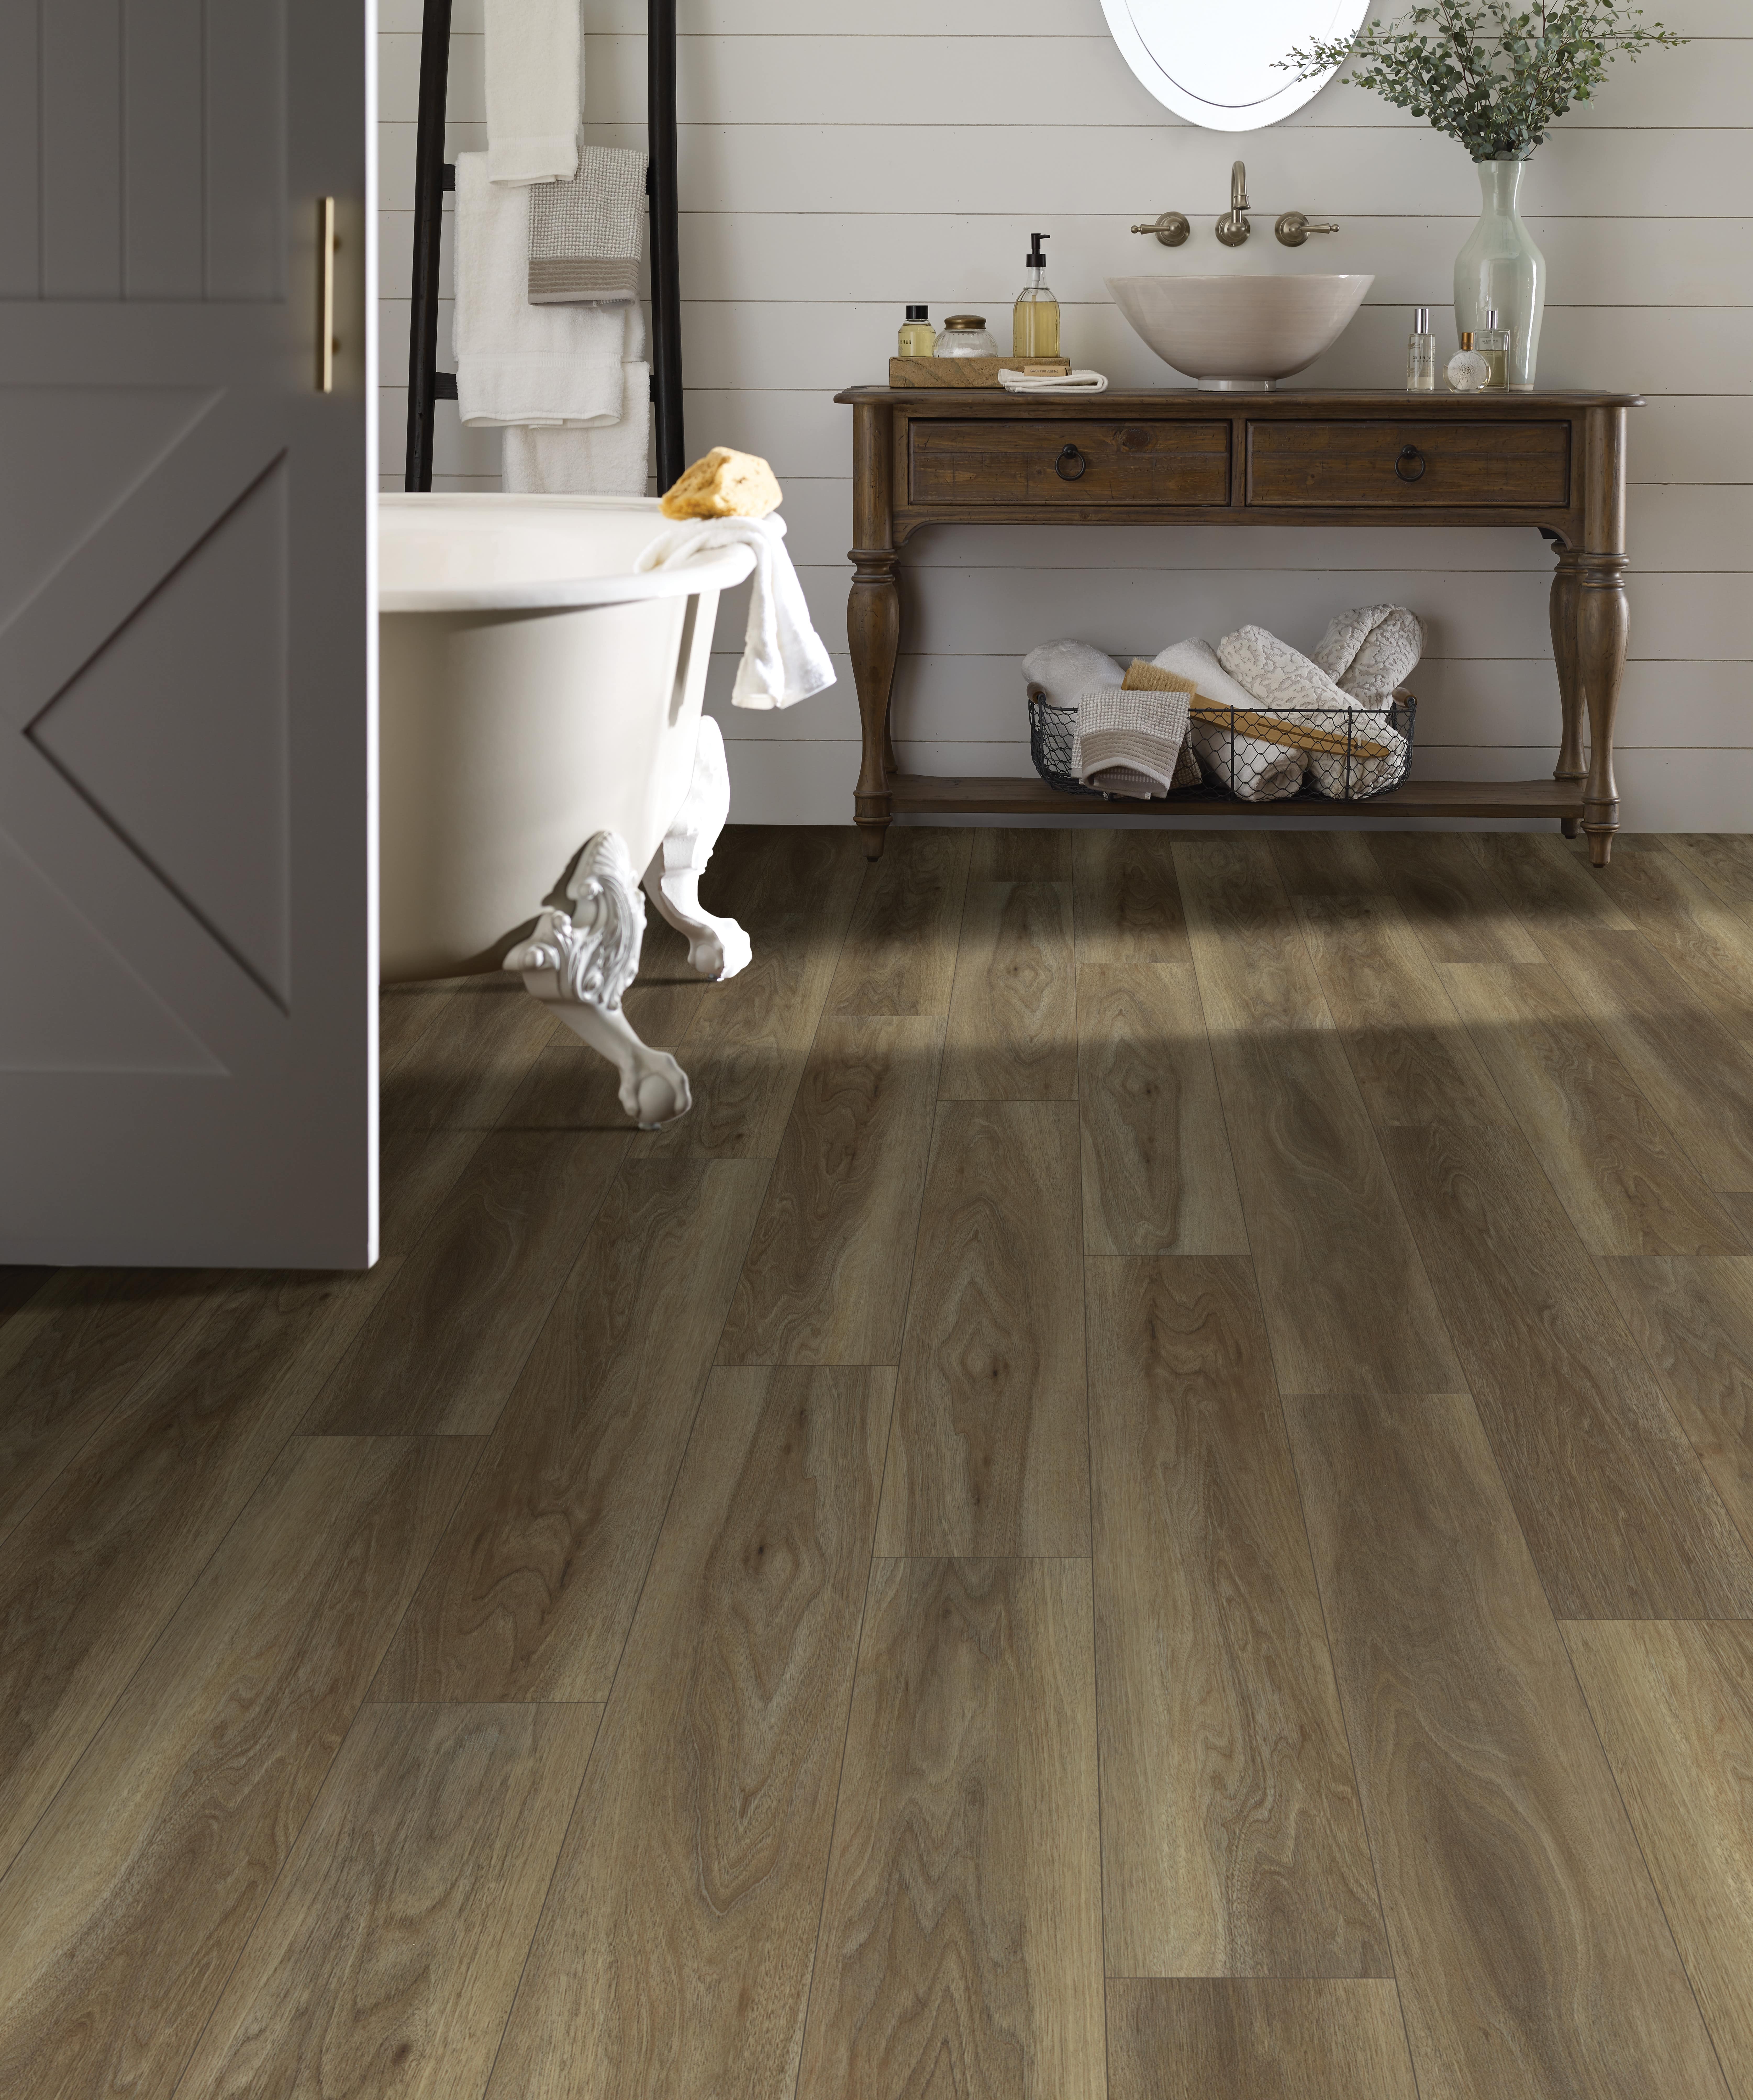 Wood Floor Bathrooms How To Do Them Right Floorings - Can You Put Laminate Flooring In The Bathroom